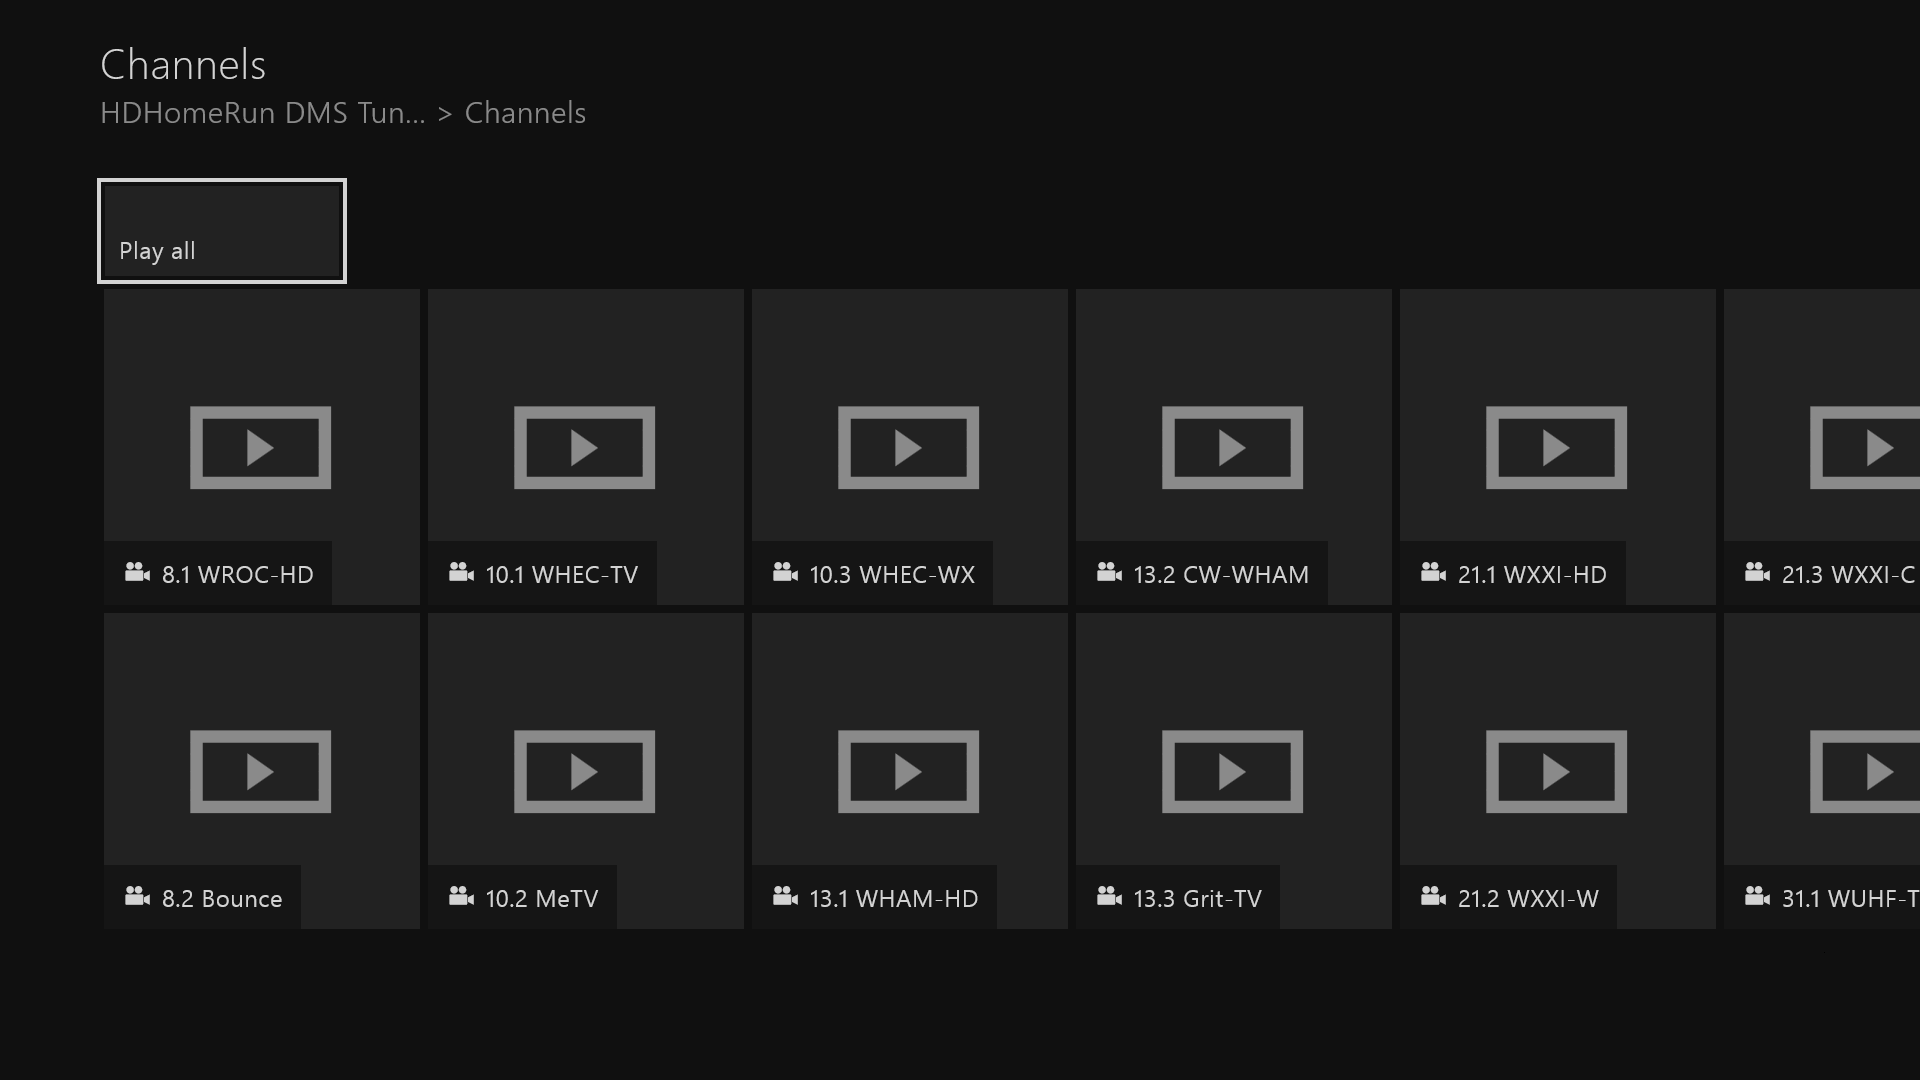   All your channels will be listed as "files" to play.  